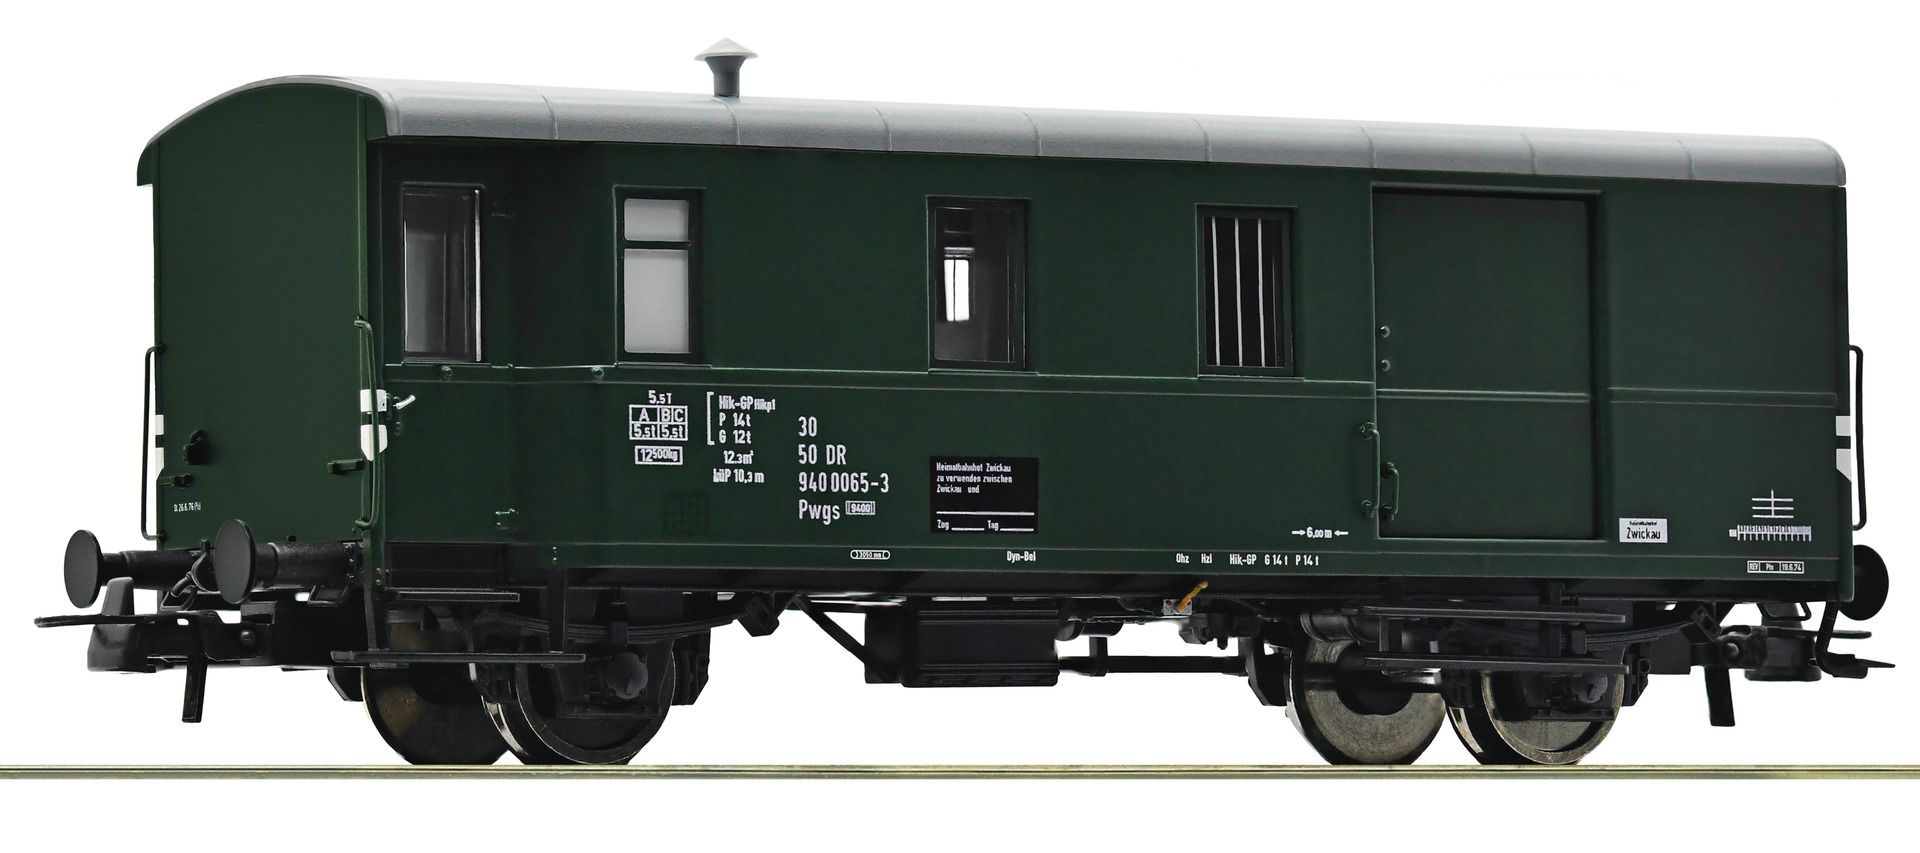 Roco 6200018 - Packwagen Pwgs 41, DR, Ep.IV